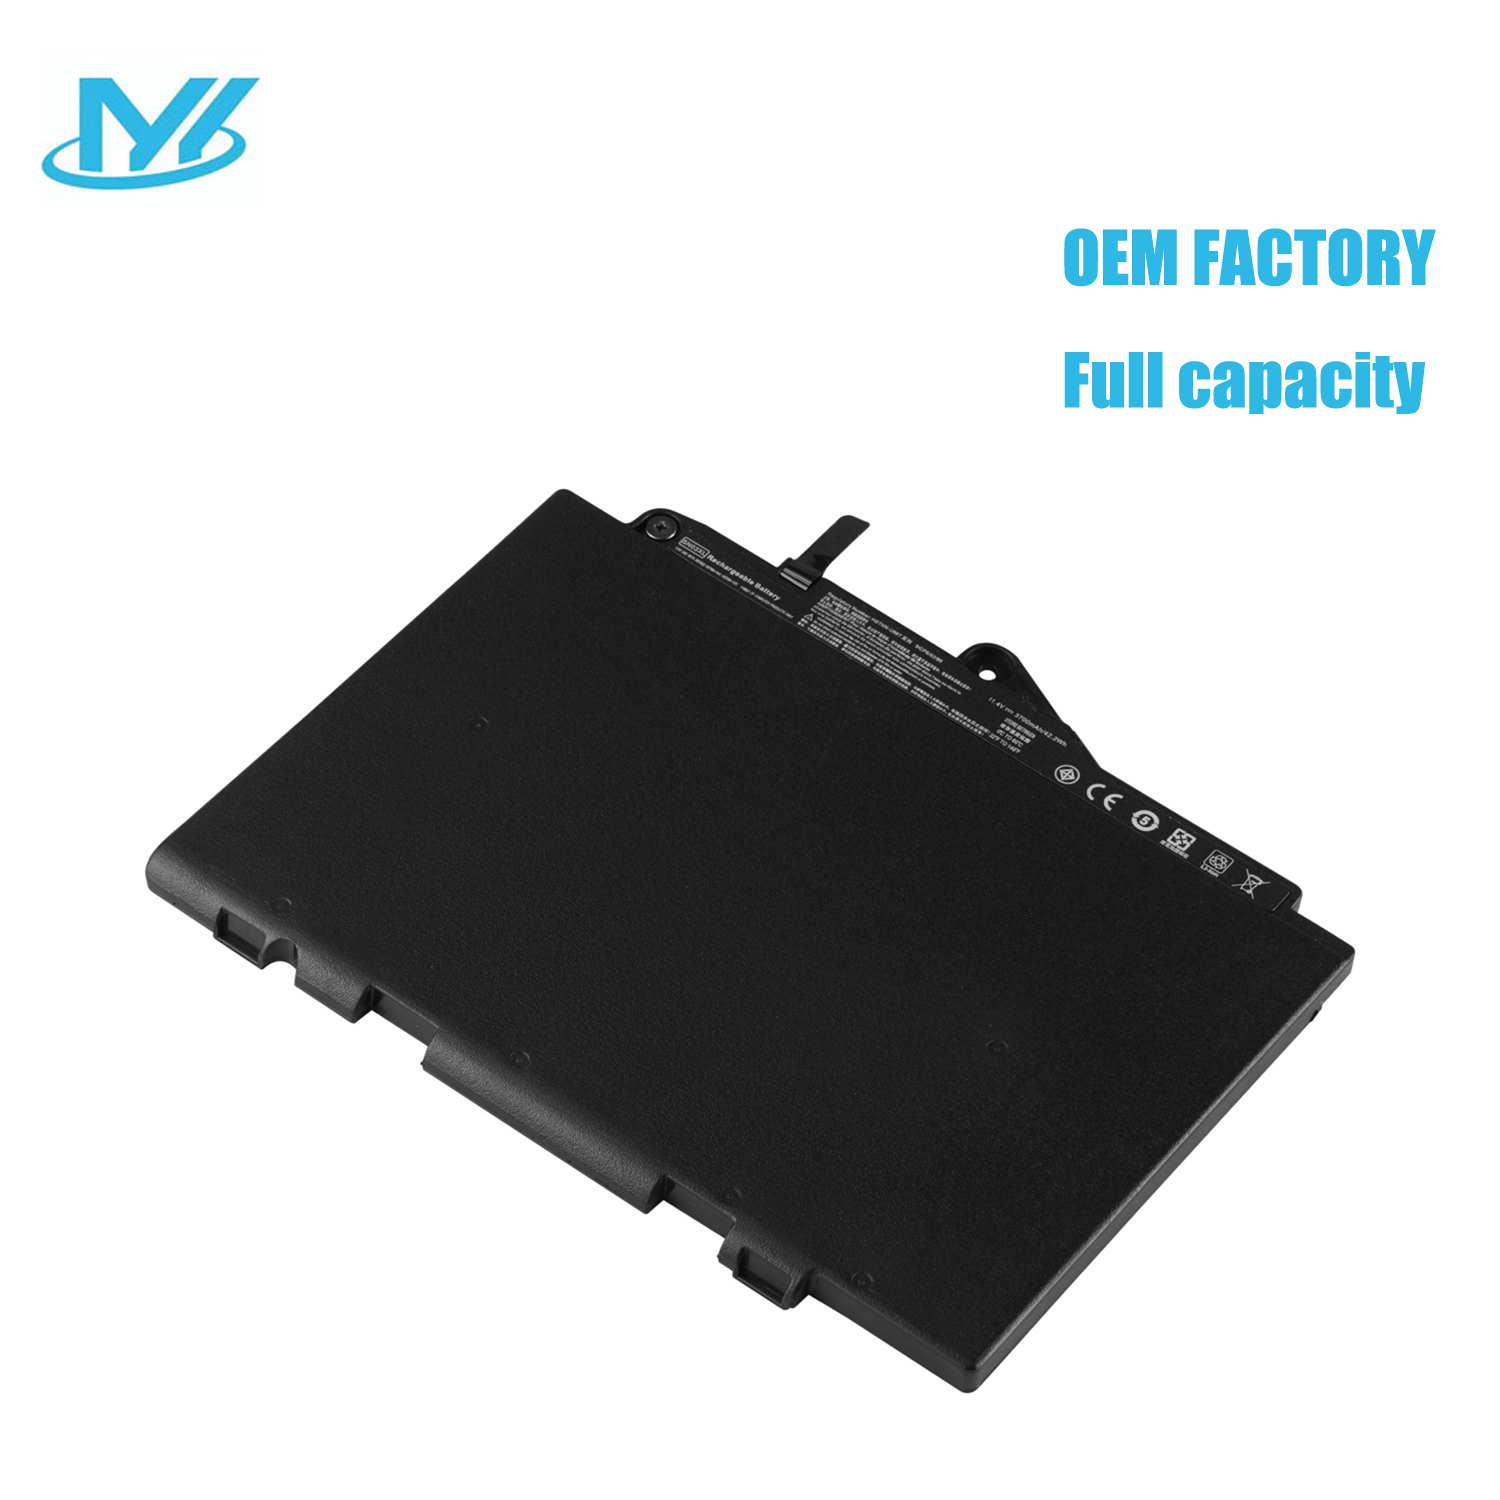 SN03XL rechargeable lithium ion Notebook battery Laptop battery For HP EliteBook 820 G3 725 G3 HSTNN-DB6V 800232-241 11.4V 42.2Wh 3700mAh